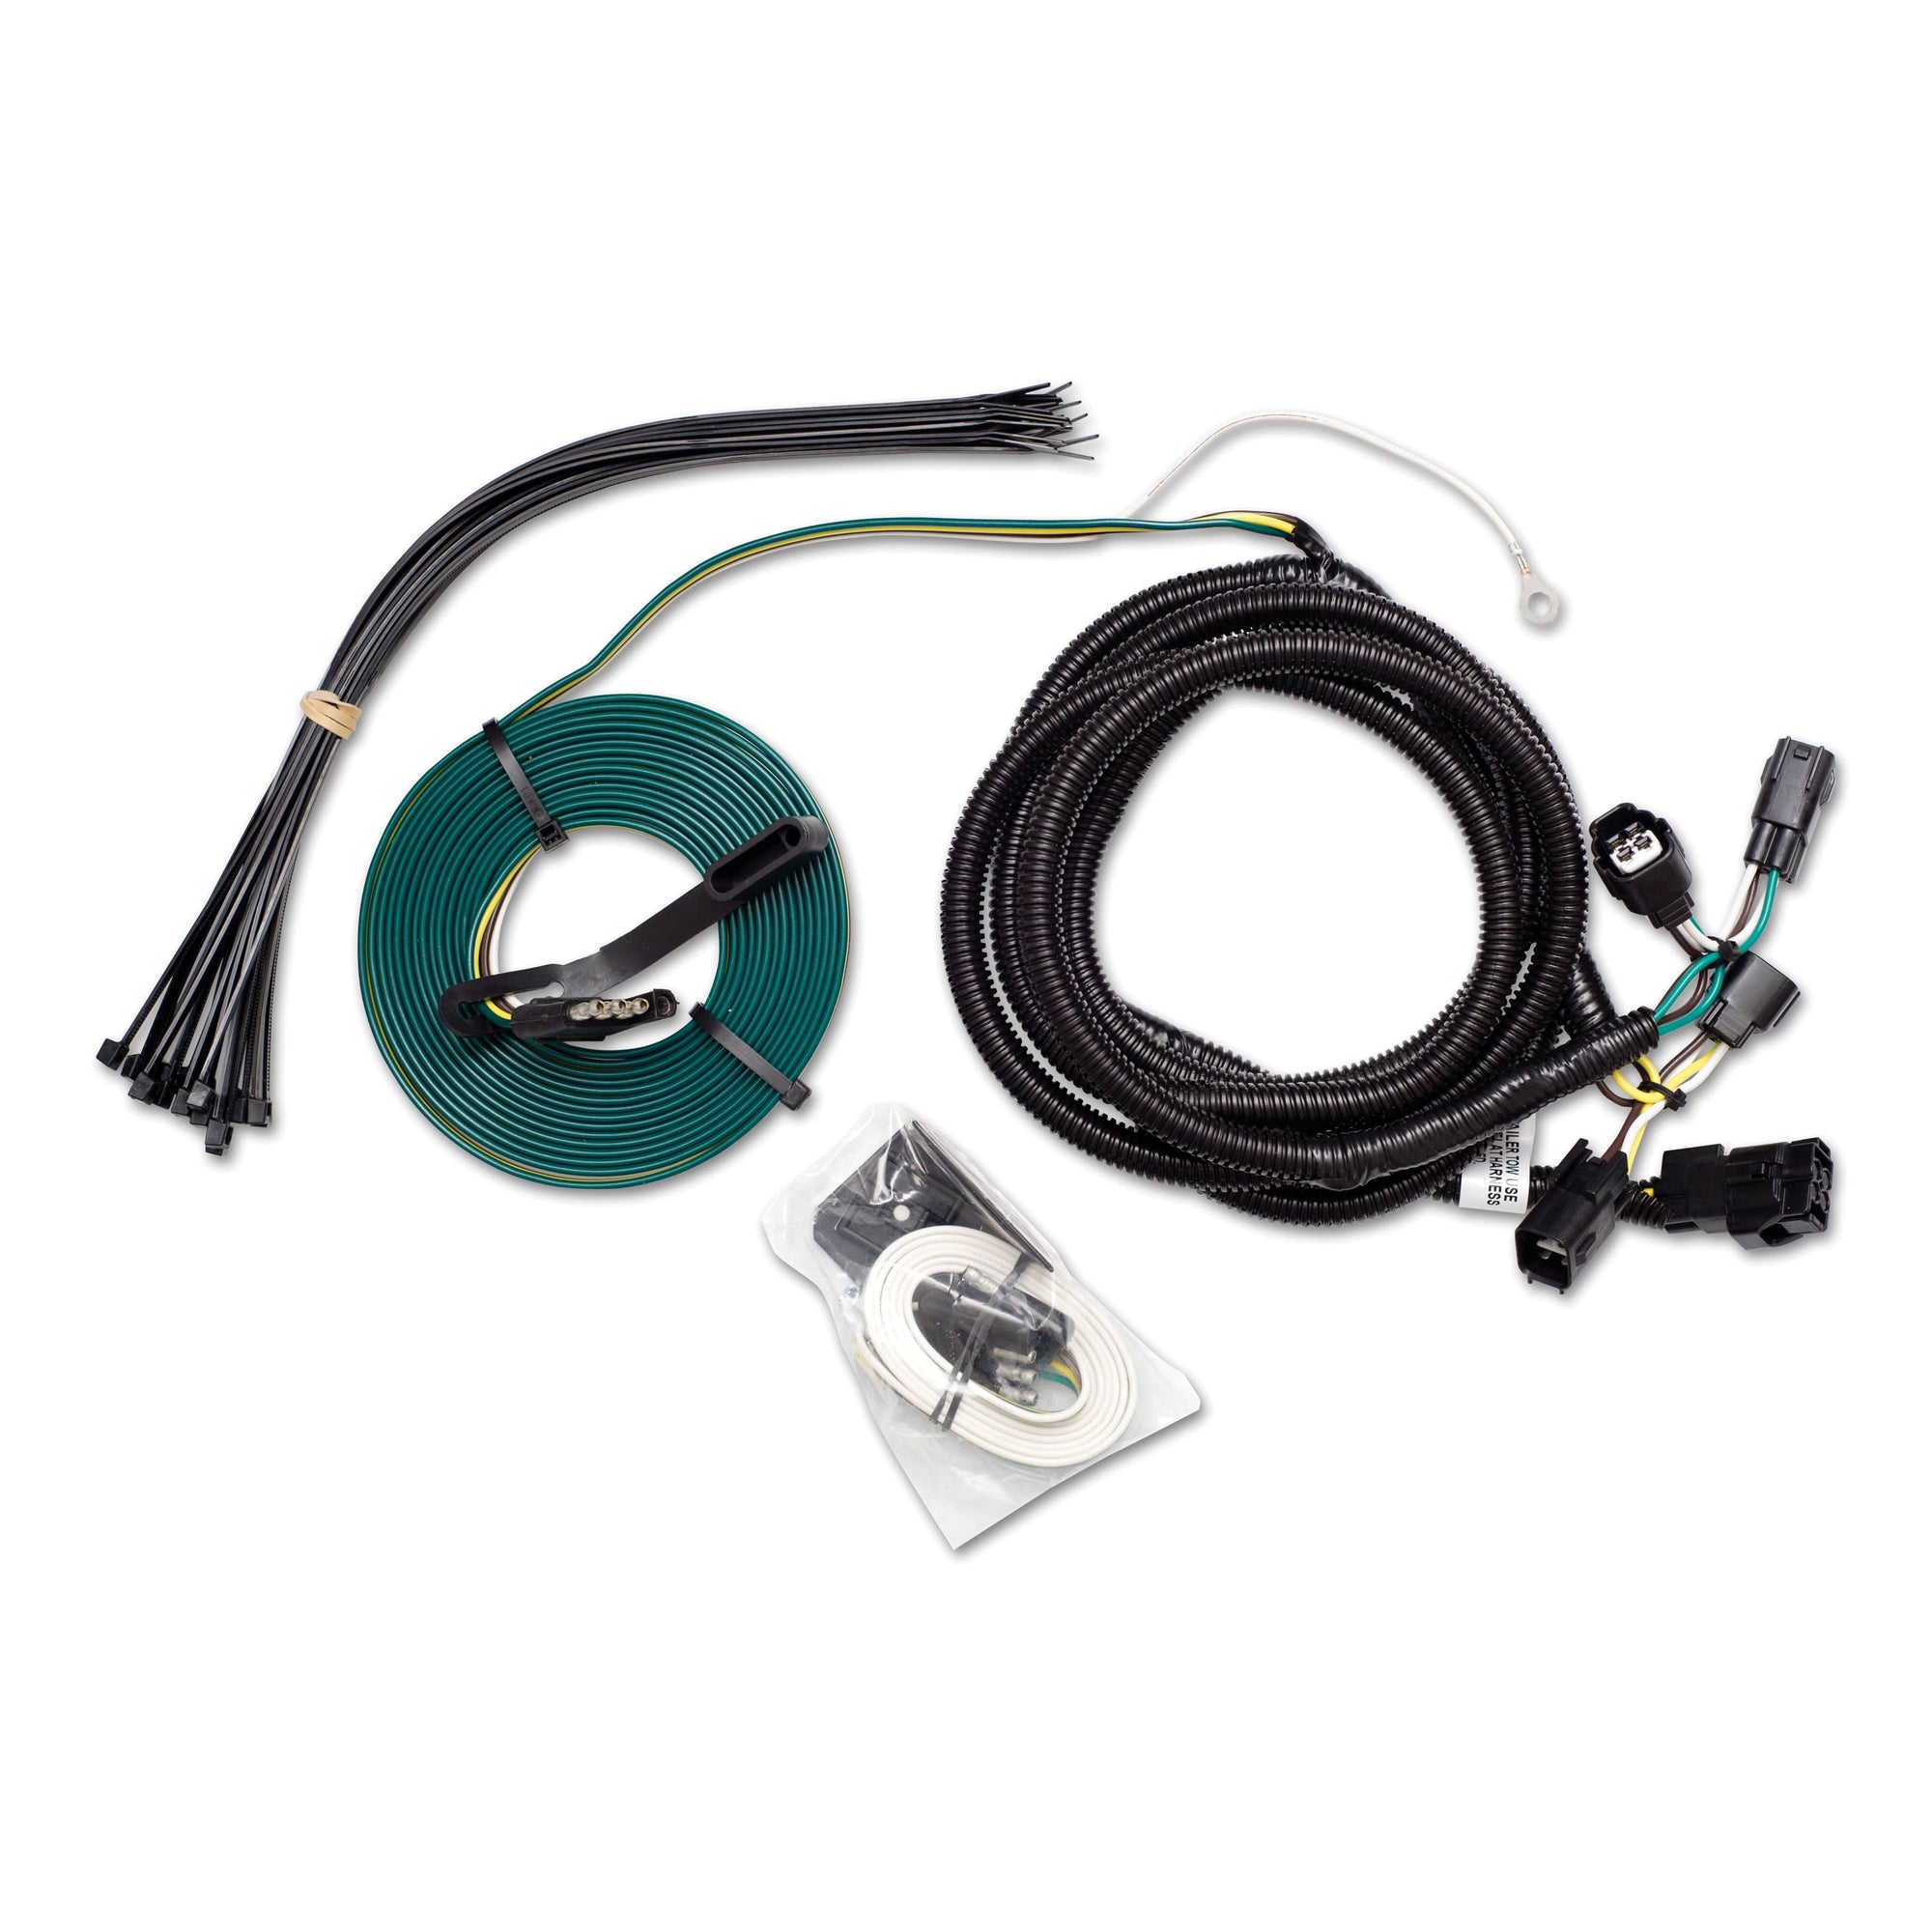 Demco 9523110 Towed Connector Vehicle Wiring Kit - For Ford Escape '13-'14